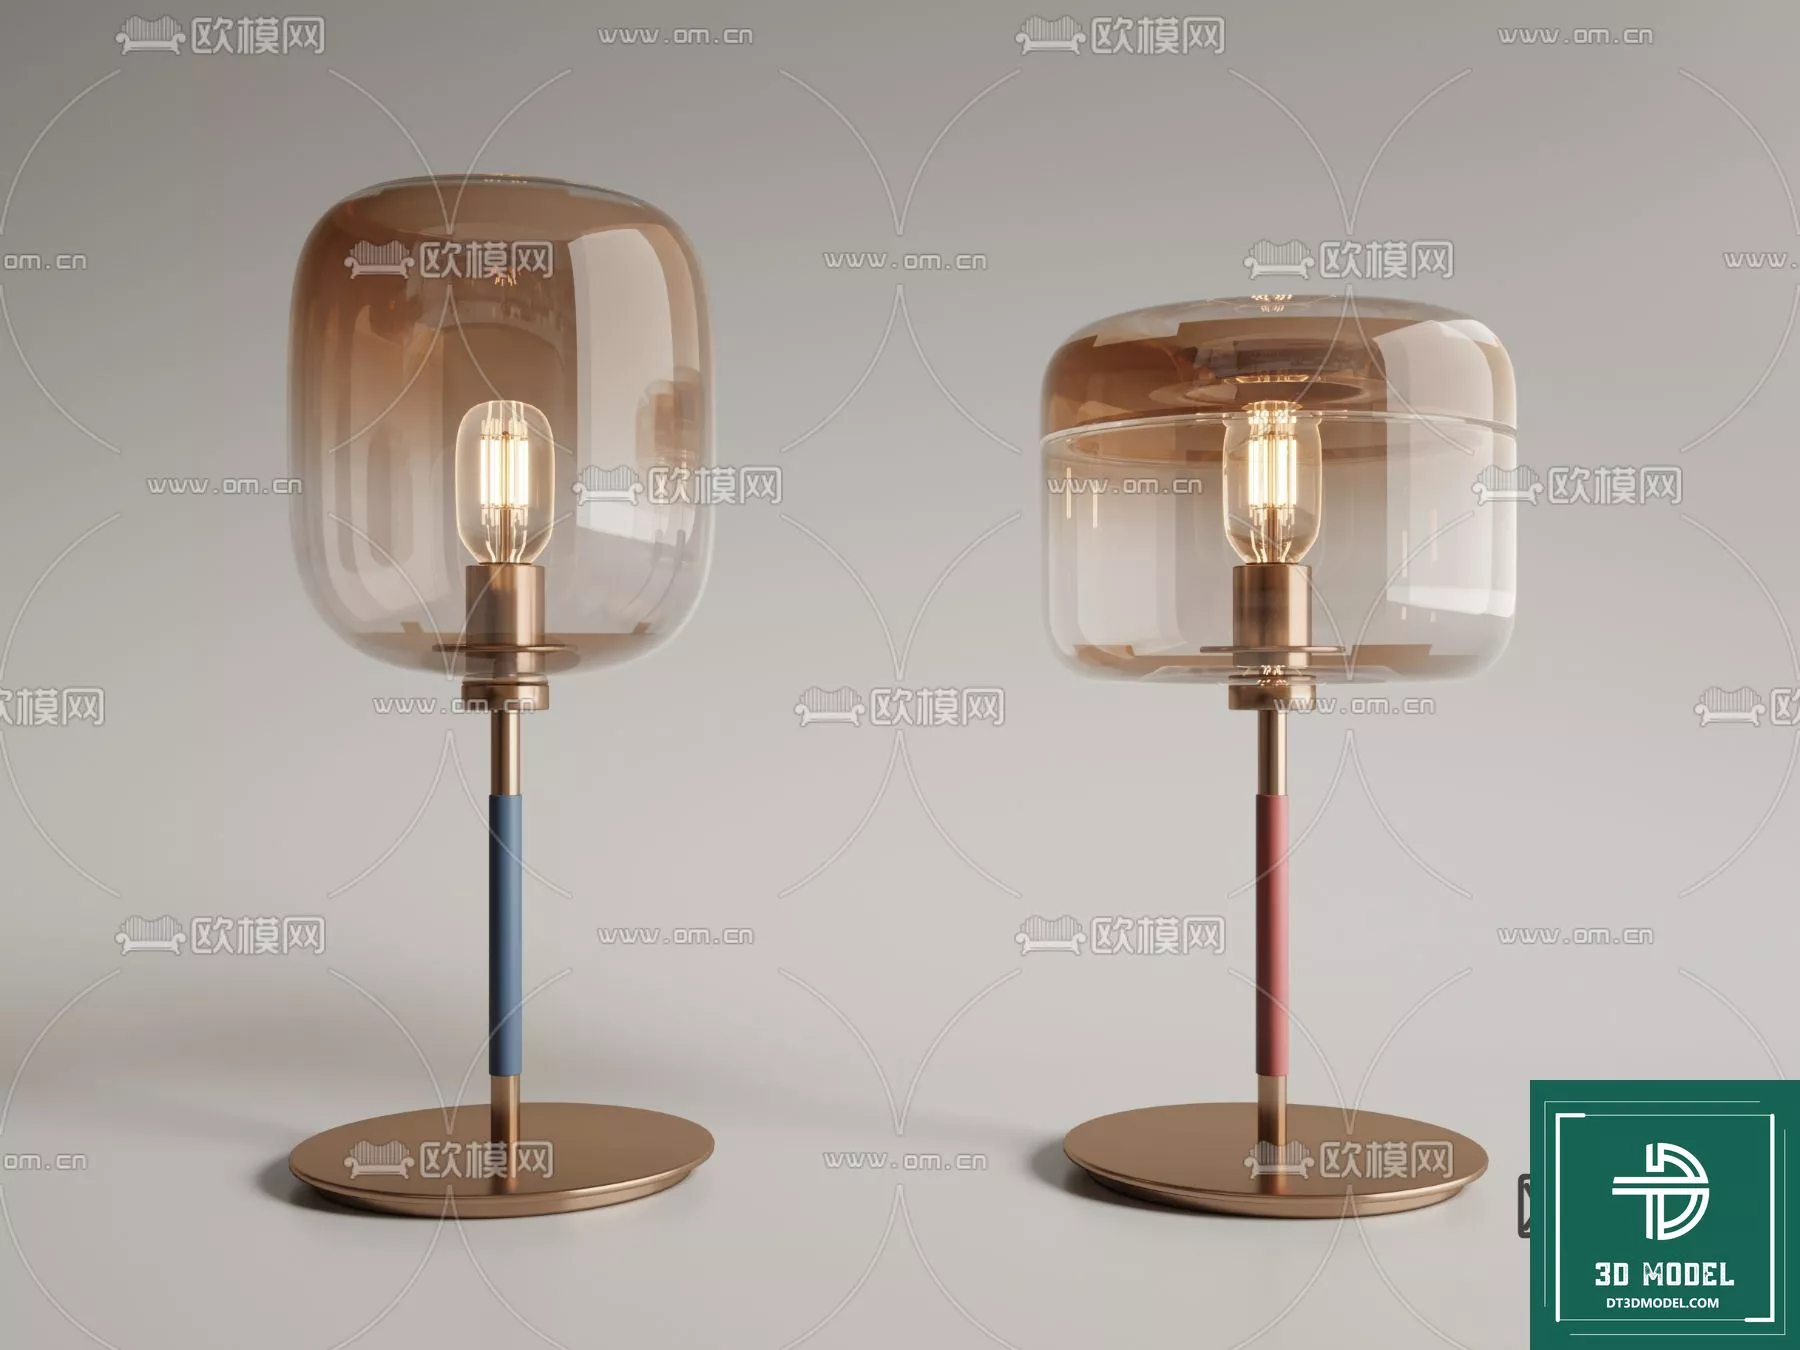 MODERN TABLE LAMP - SKETCHUP 3D MODEL - VRAY OR ENSCAPE - ID14648